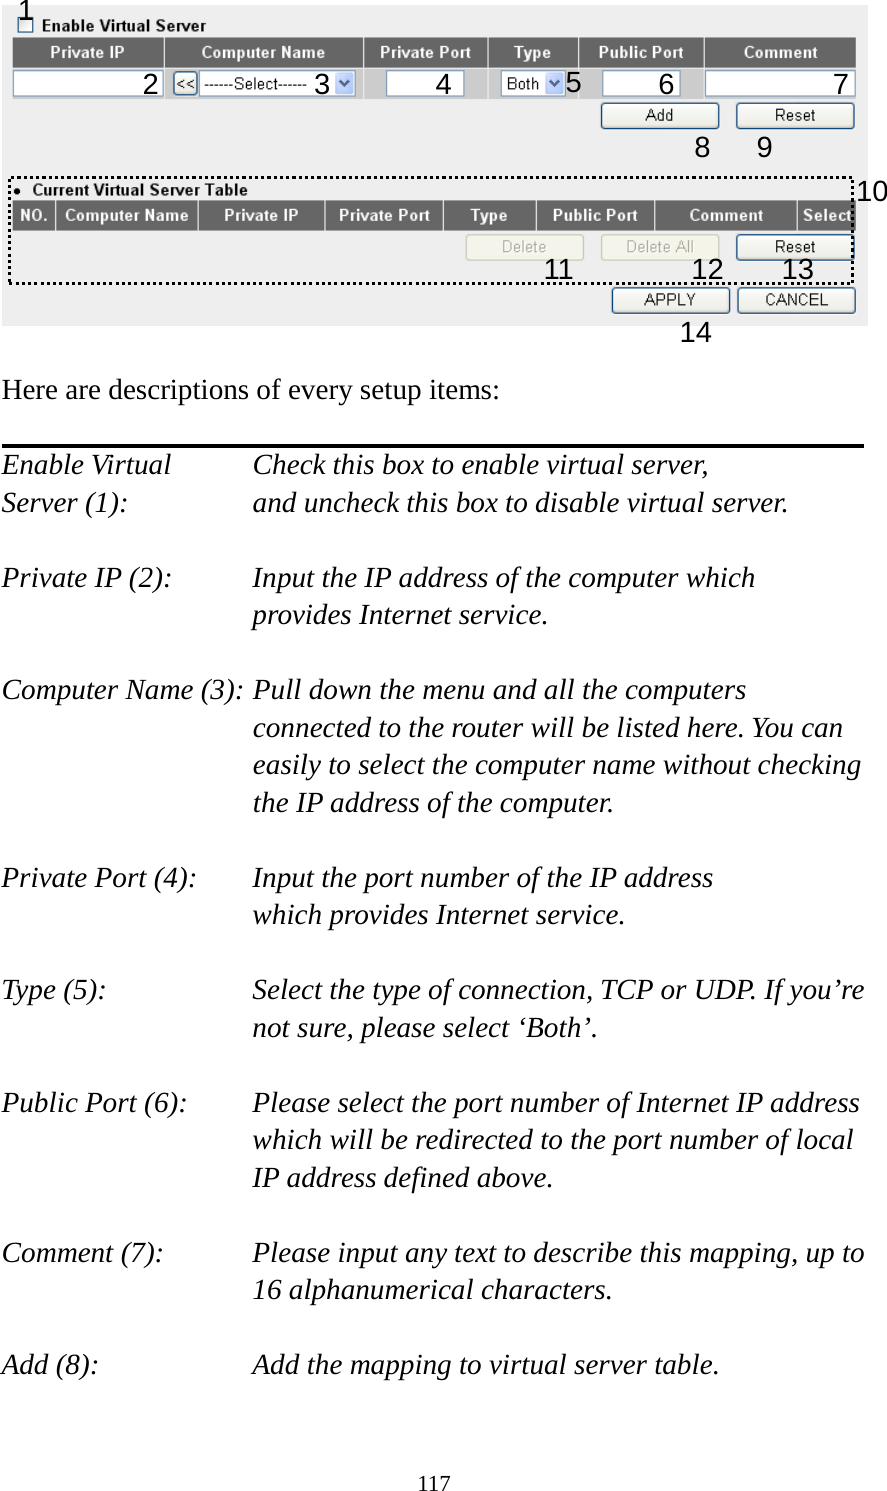 117   Here are descriptions of every setup items:  Enable Virtual      Check this box to enable virtual server, Server (1):       and uncheck this box to disable virtual server.  Private IP (2):      Input the IP address of the computer which      provides Internet service.  Computer Name (3): Pull down the menu and all the computers connected to the router will be listed here. You can easily to select the computer name without checking the IP address of the computer.  Private Port (4):    Input the port number of the IP address      which provides Internet service.  Type (5):    Select the type of connection, TCP or UDP. If you’re not sure, please select ‘Both’.  Public Port (6):    Please select the port number of Internet IP address which will be redirected to the port number of local IP address defined above.  Comment (7):    Please input any text to describe this mapping, up to 16 alphanumerical characters.  Add (8):        Add the mapping to virtual server table.  1 2 3 4 5 8  9 10 11 12 13 14 7 6 